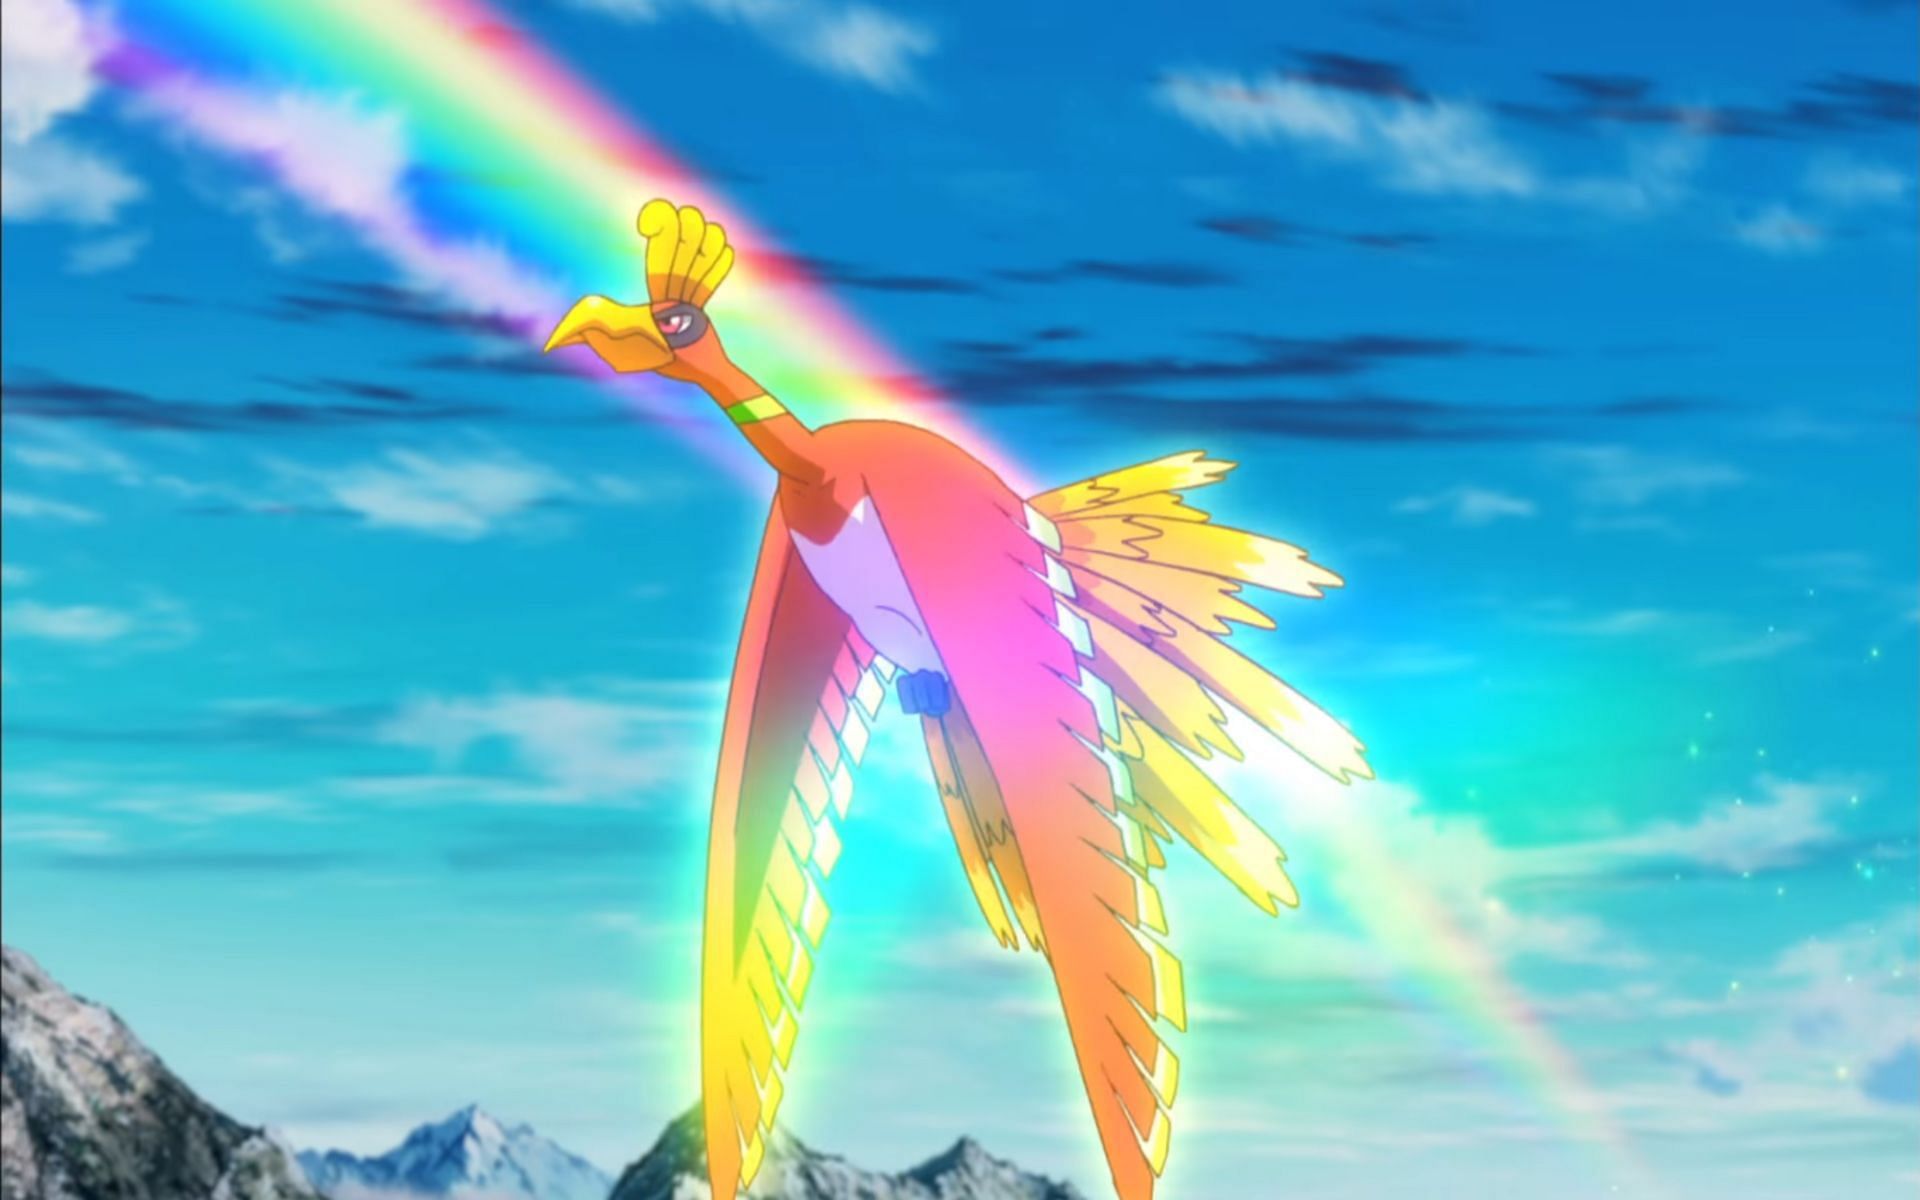 Ho-oh rests in Tin Tower in Ecruteak City (Image via The Pokemon Company)